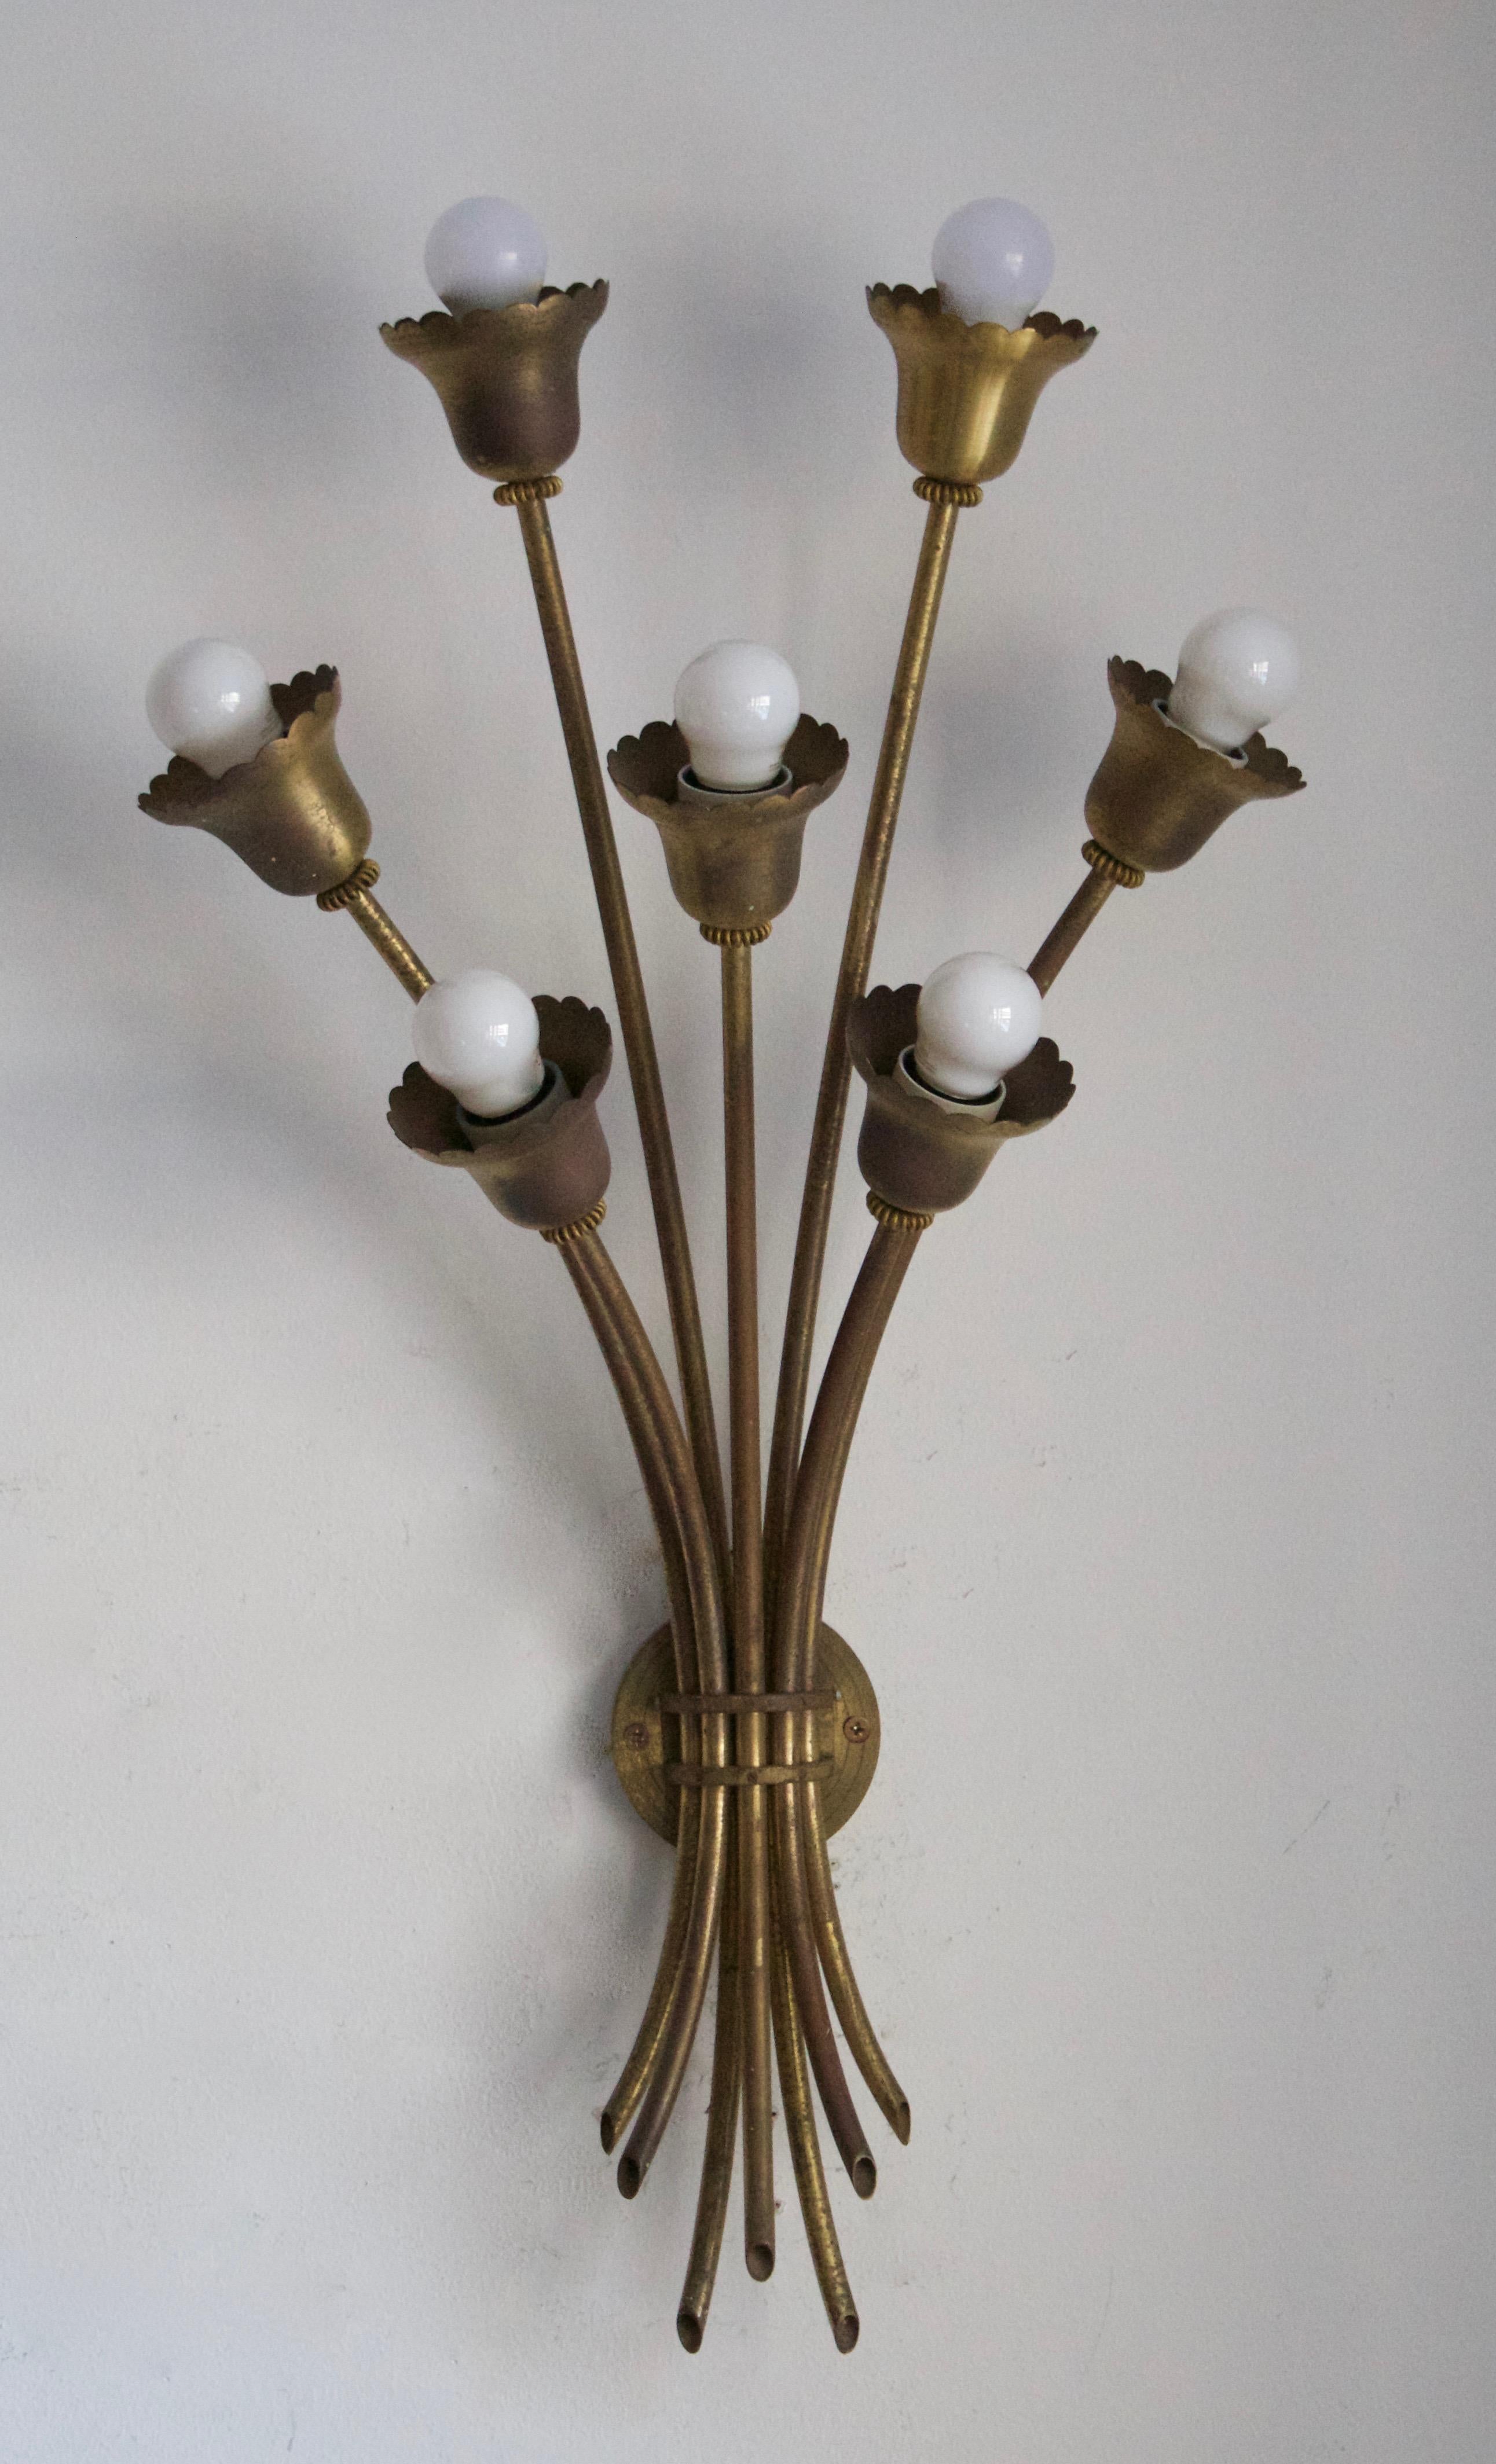 A pair of sizeable organic wall lights, designed and produced in Denmark, 1940s-1950s. Features brass. 

Features seven light sockets, each taking a single lightbulb on E27 base. No stated max wattage.

Other designers of the period include